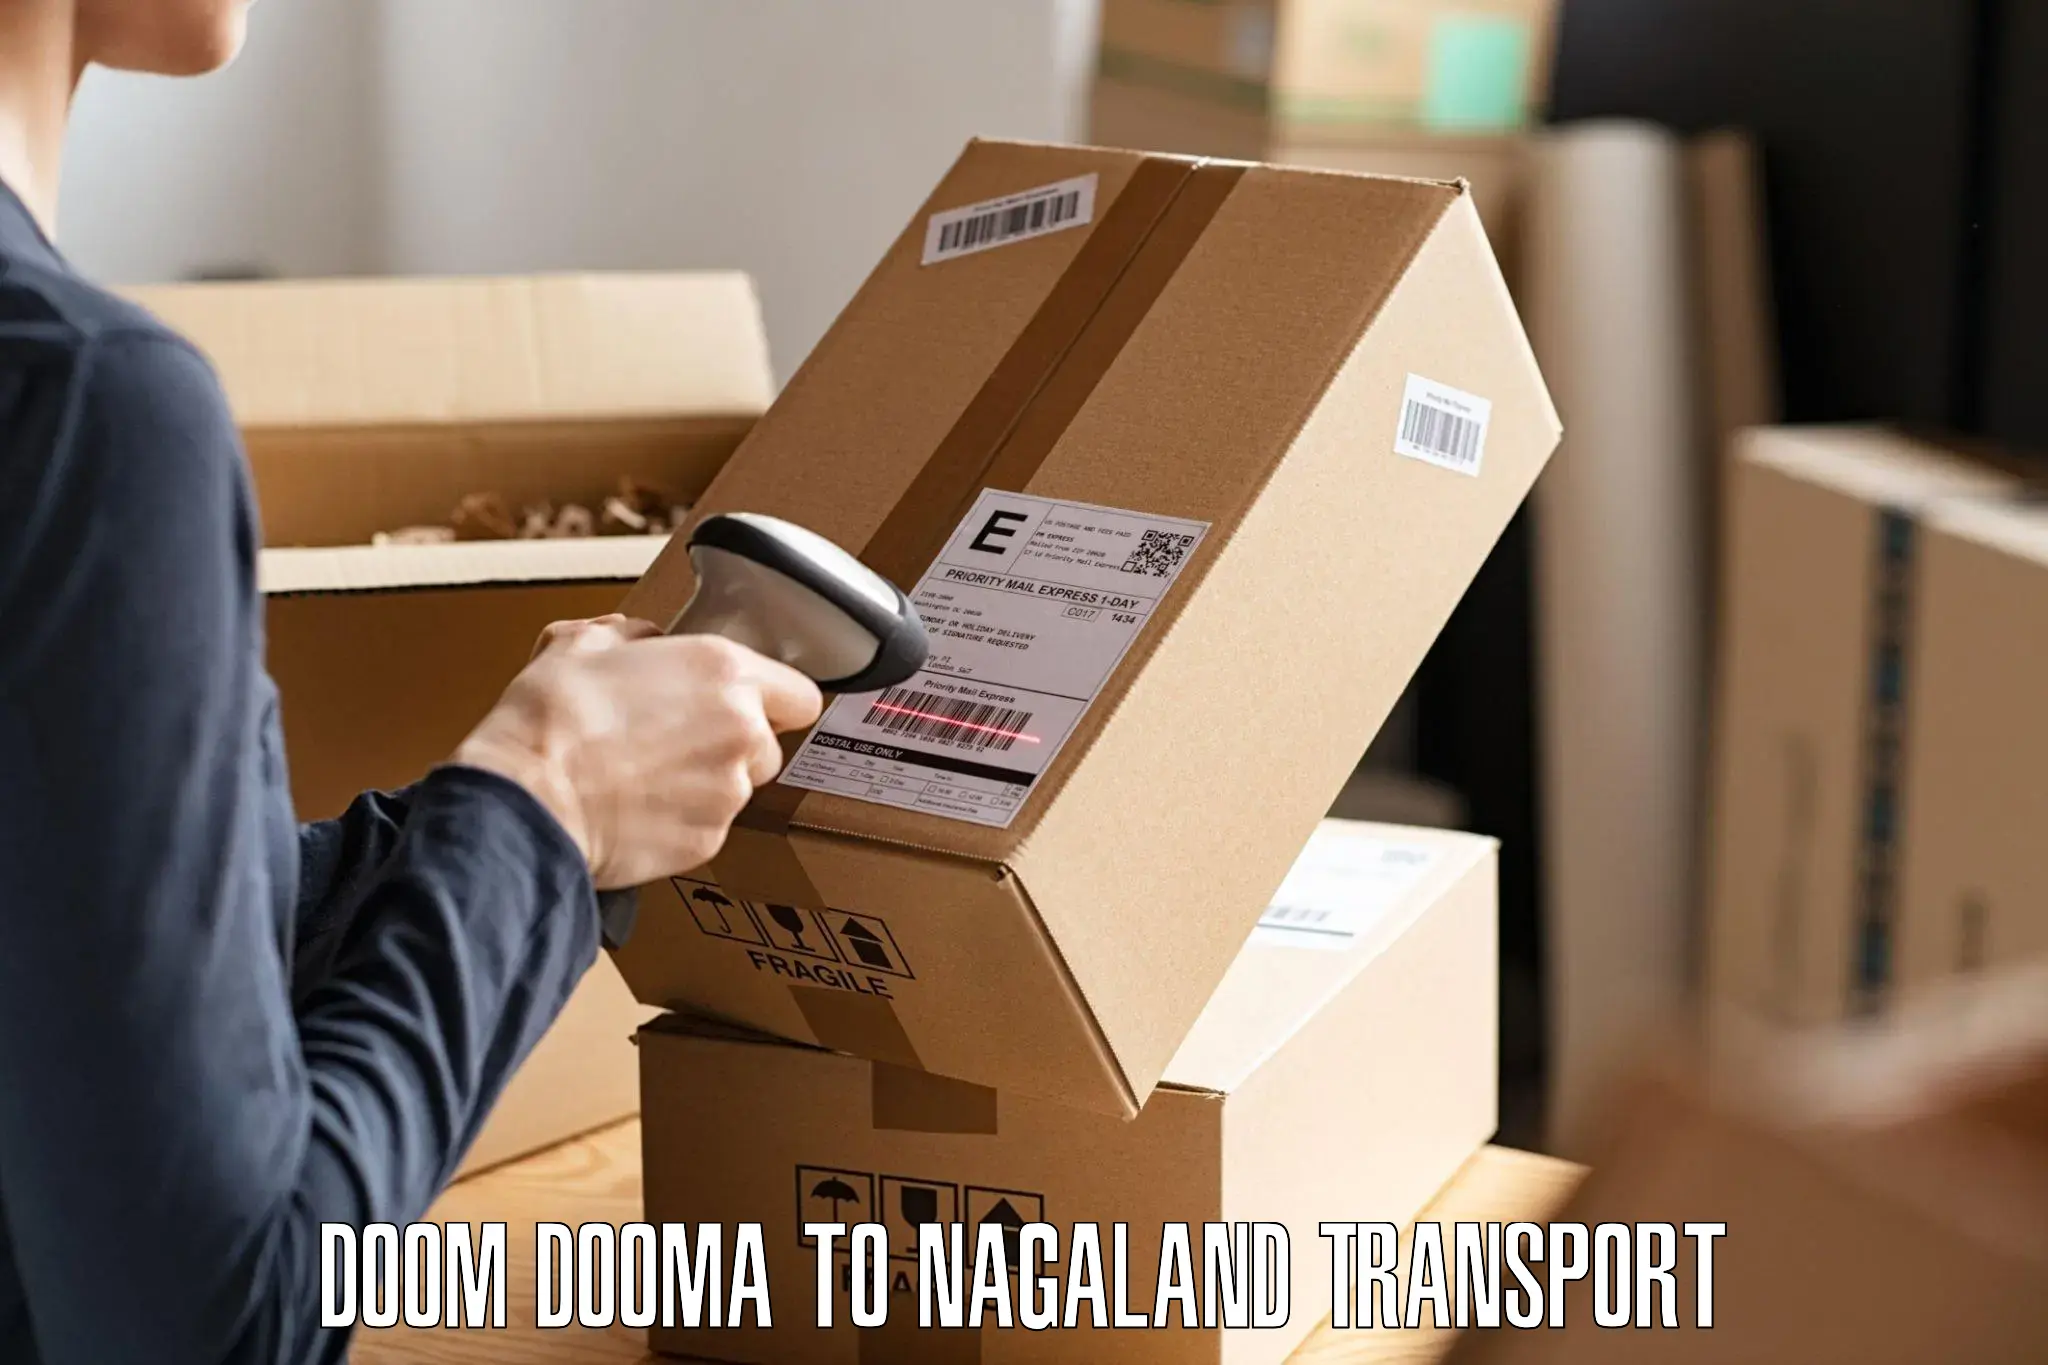 Express transport services Doom Dooma to Mon